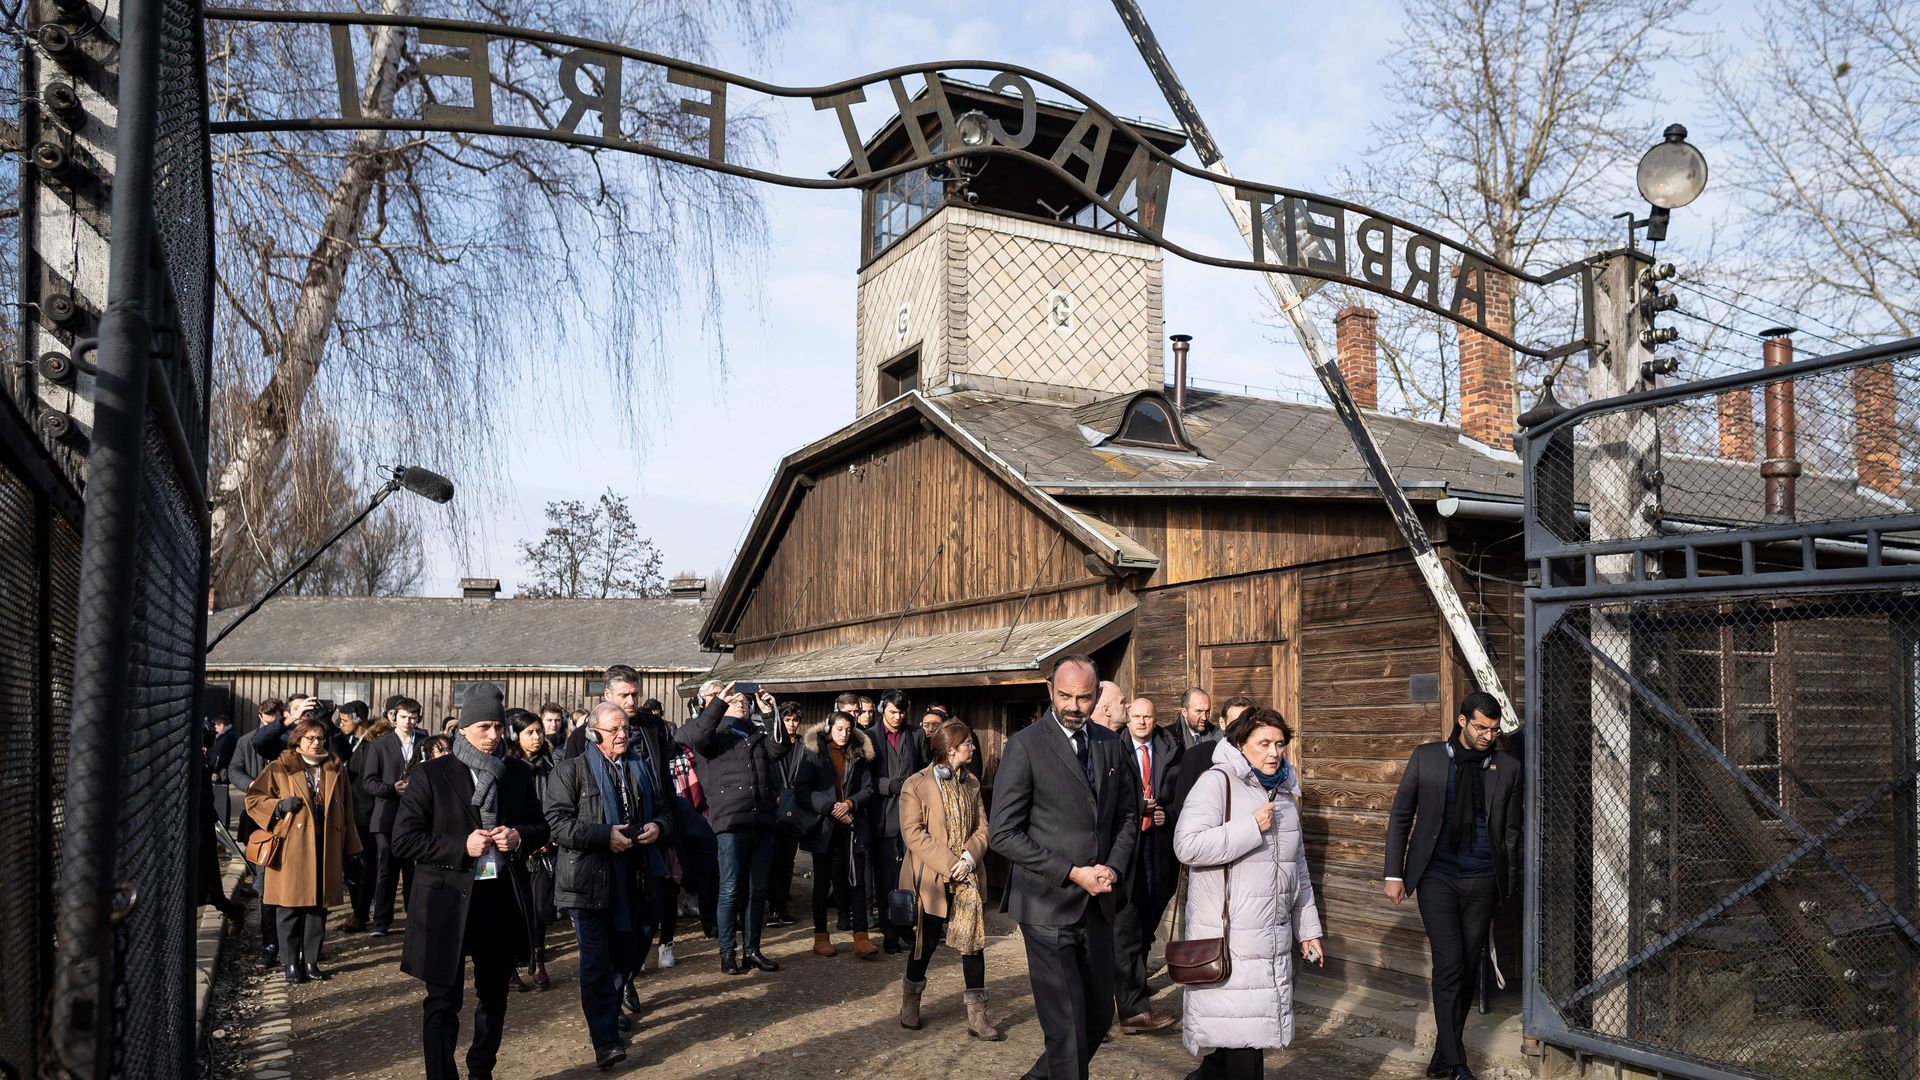 French Prime Minister Edouard Philippe walks through a gate with the inscription "Work sets you free" (Arbeit macht frei)